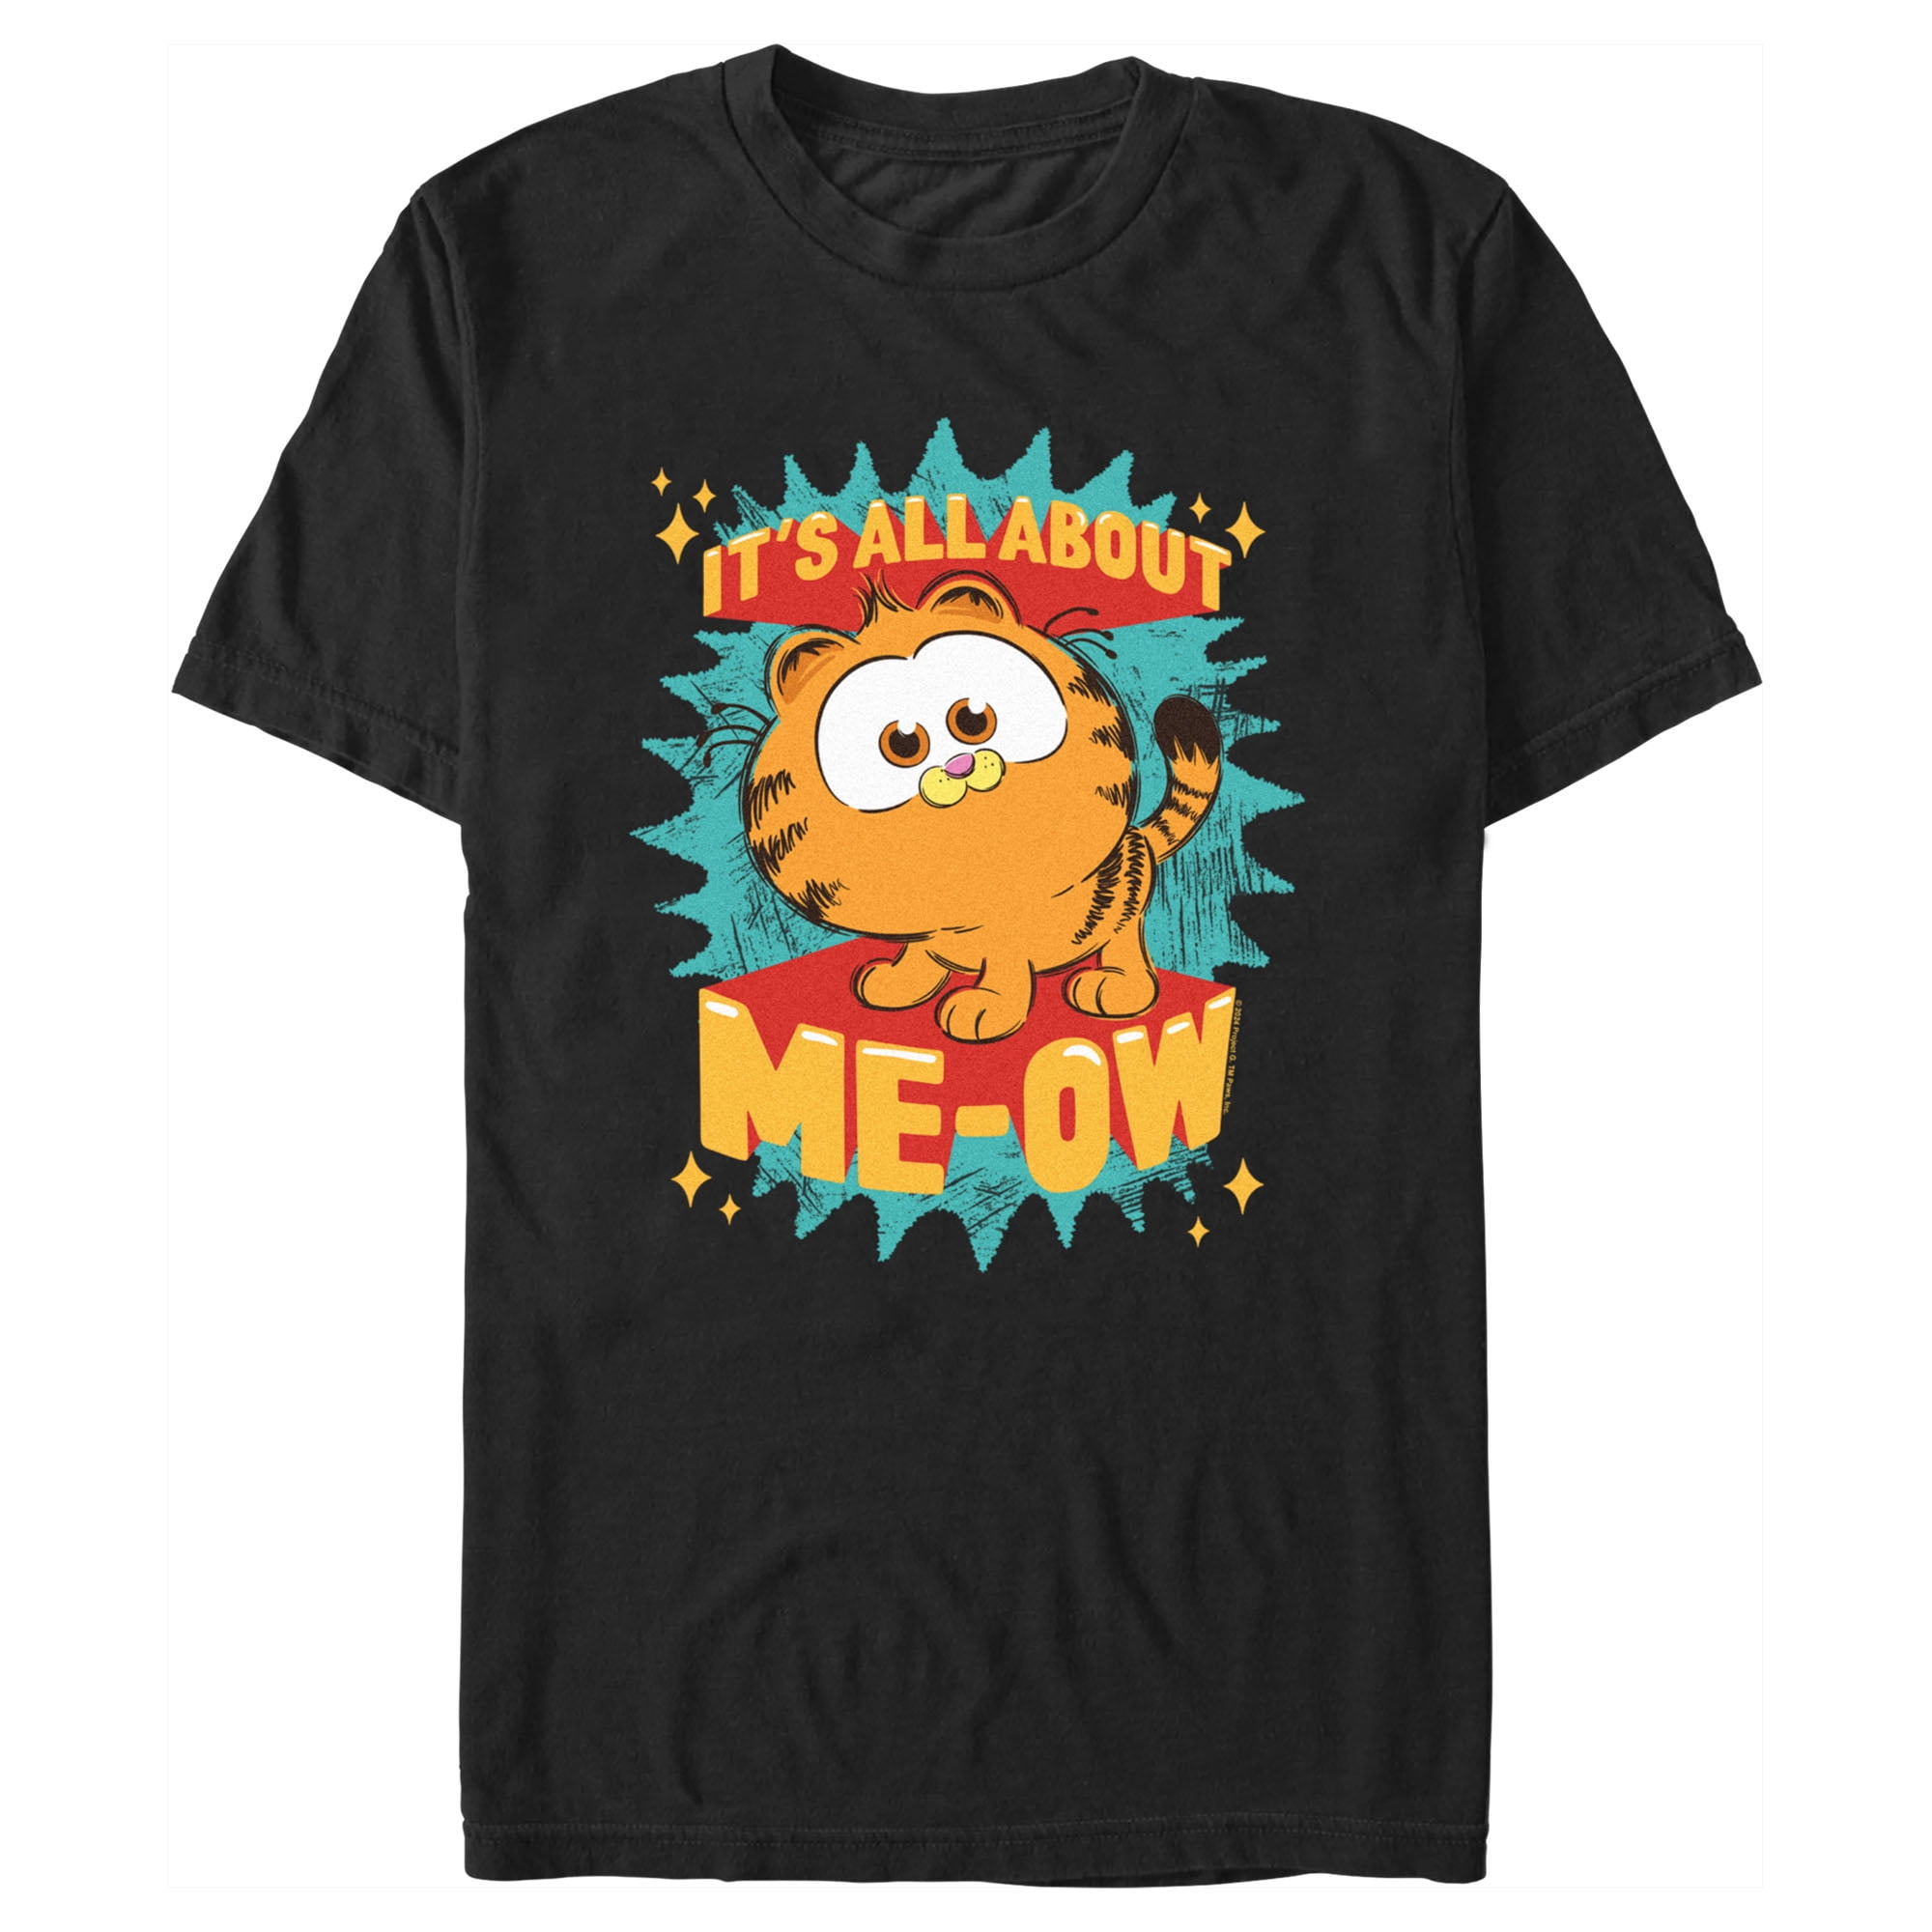 Extrem günstige Rabattpreise Men\'s The Me-Ow Tee Graphic About 2X Movie Garfield All It\'s Black Large